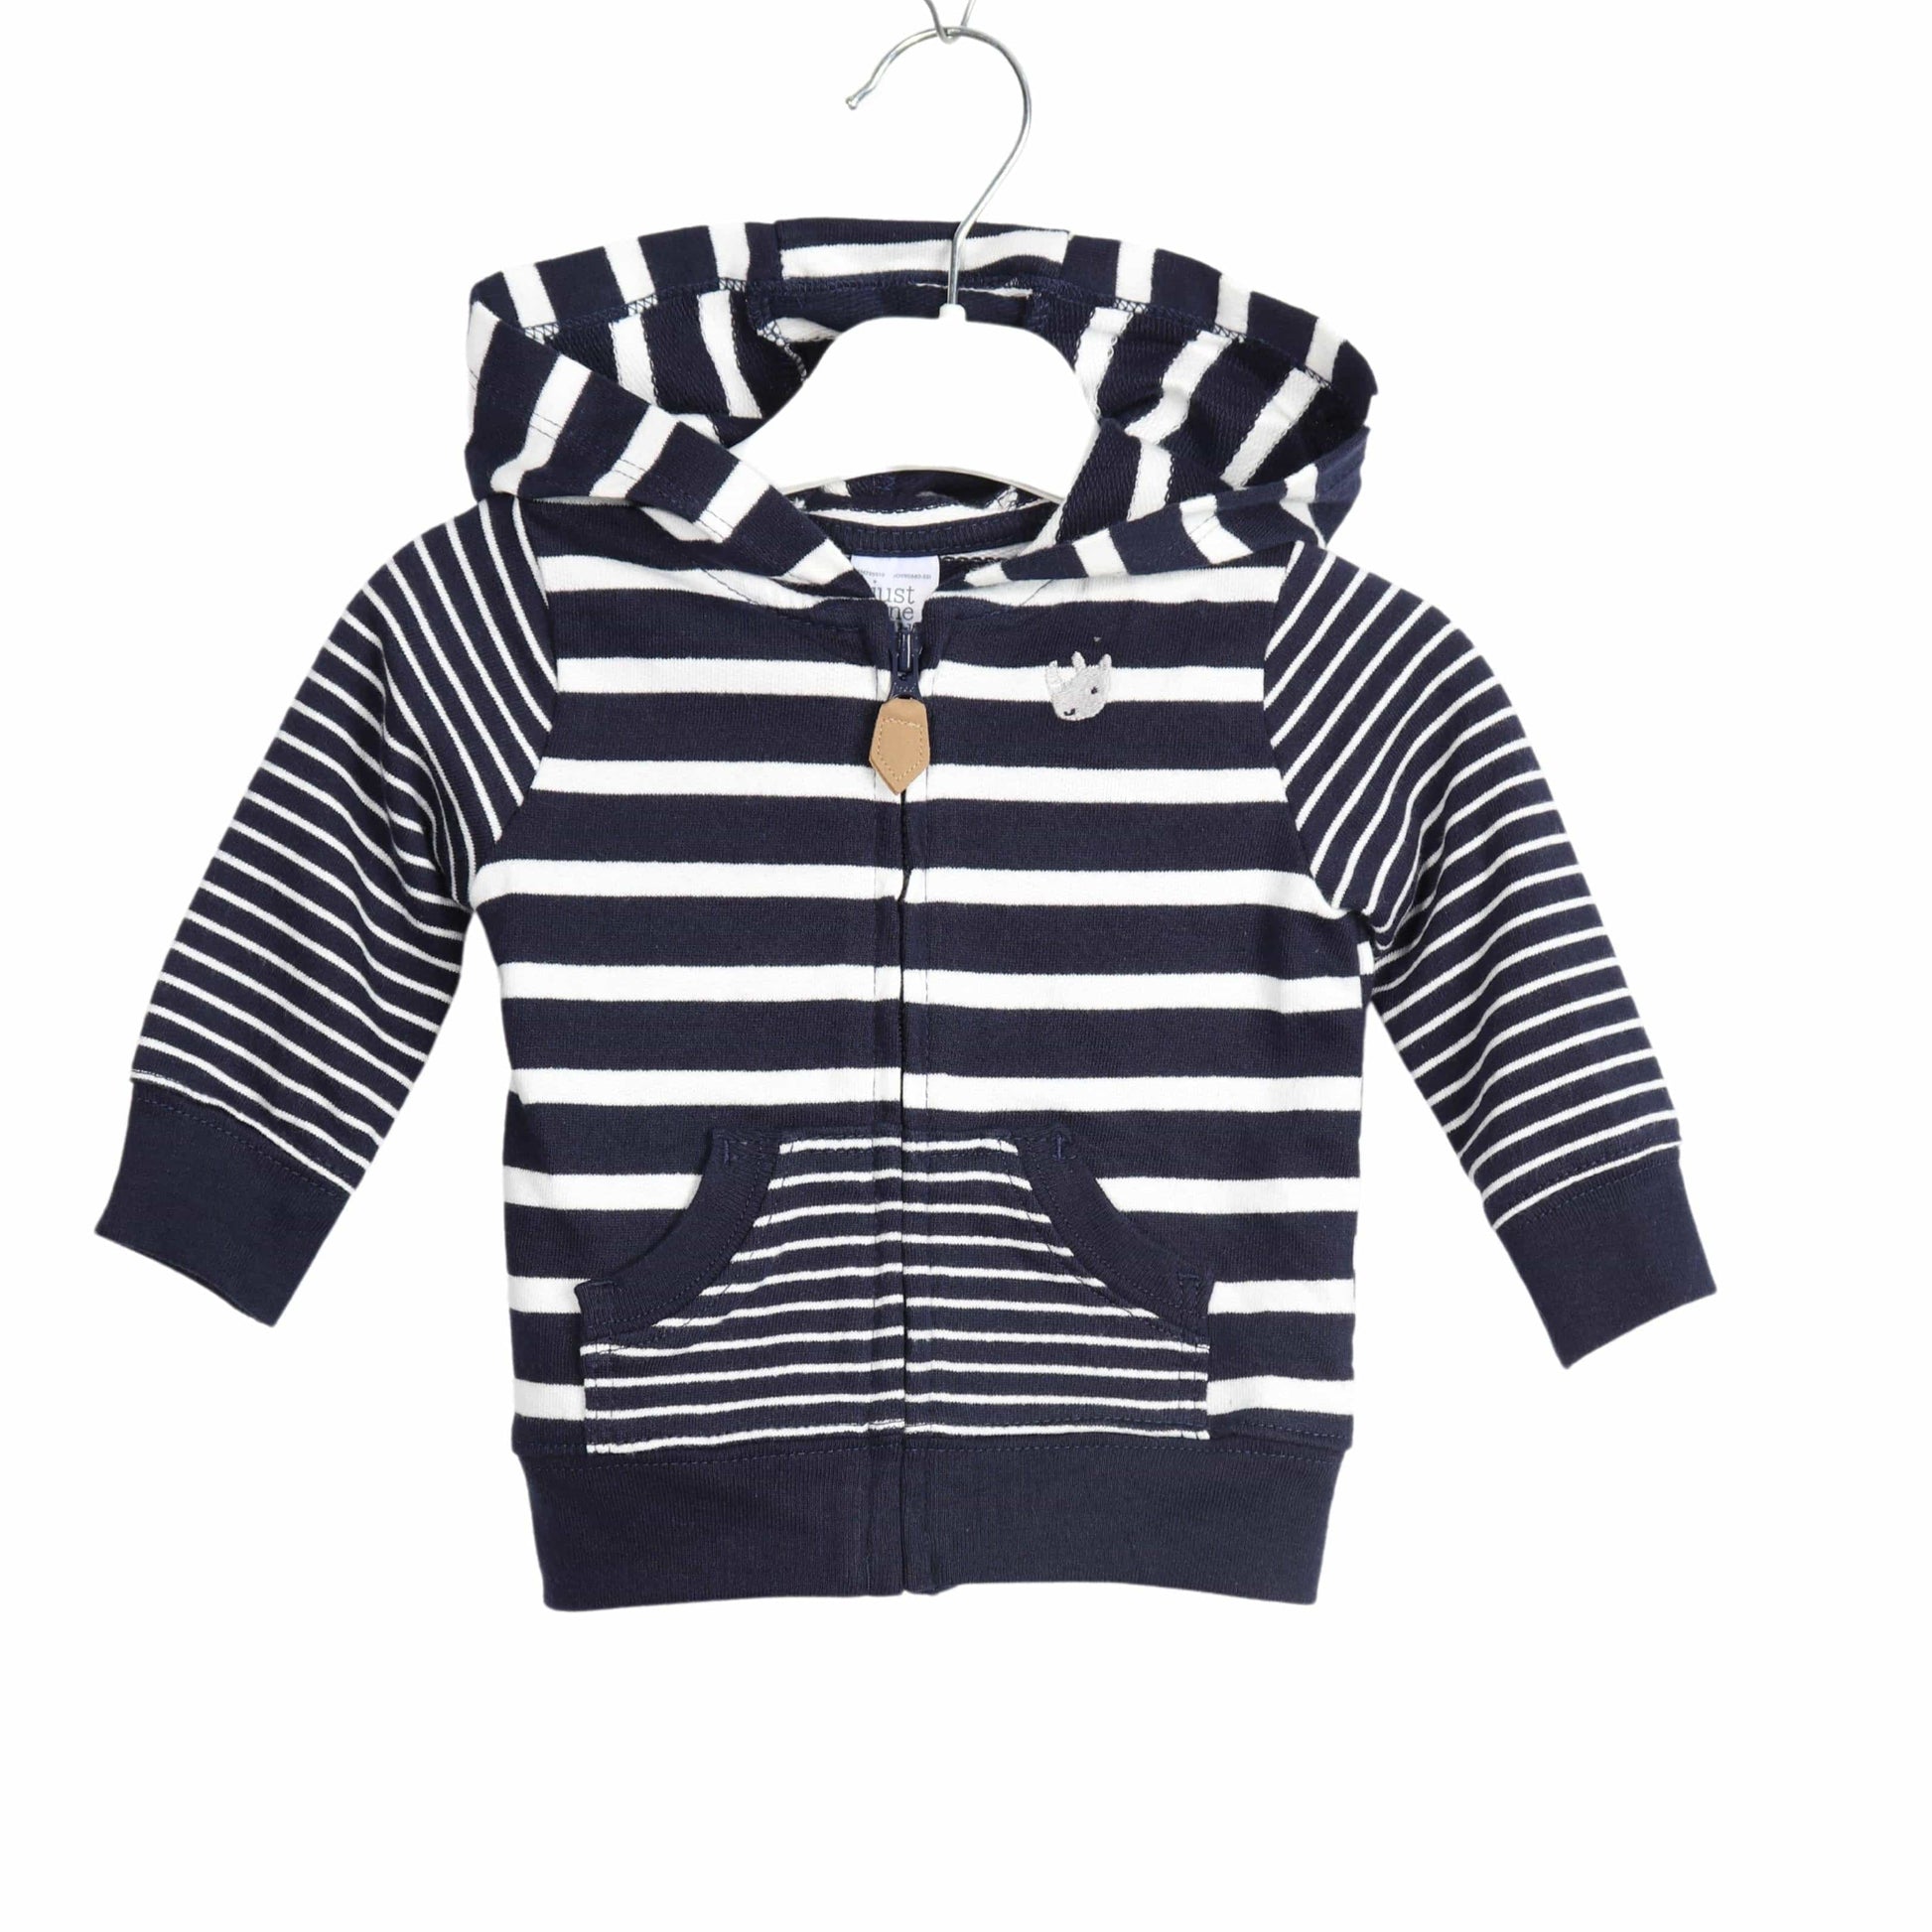 CARTER'S Baby Boy 3 Month / Navy CARTER'S n- Stripped Casual Jacket